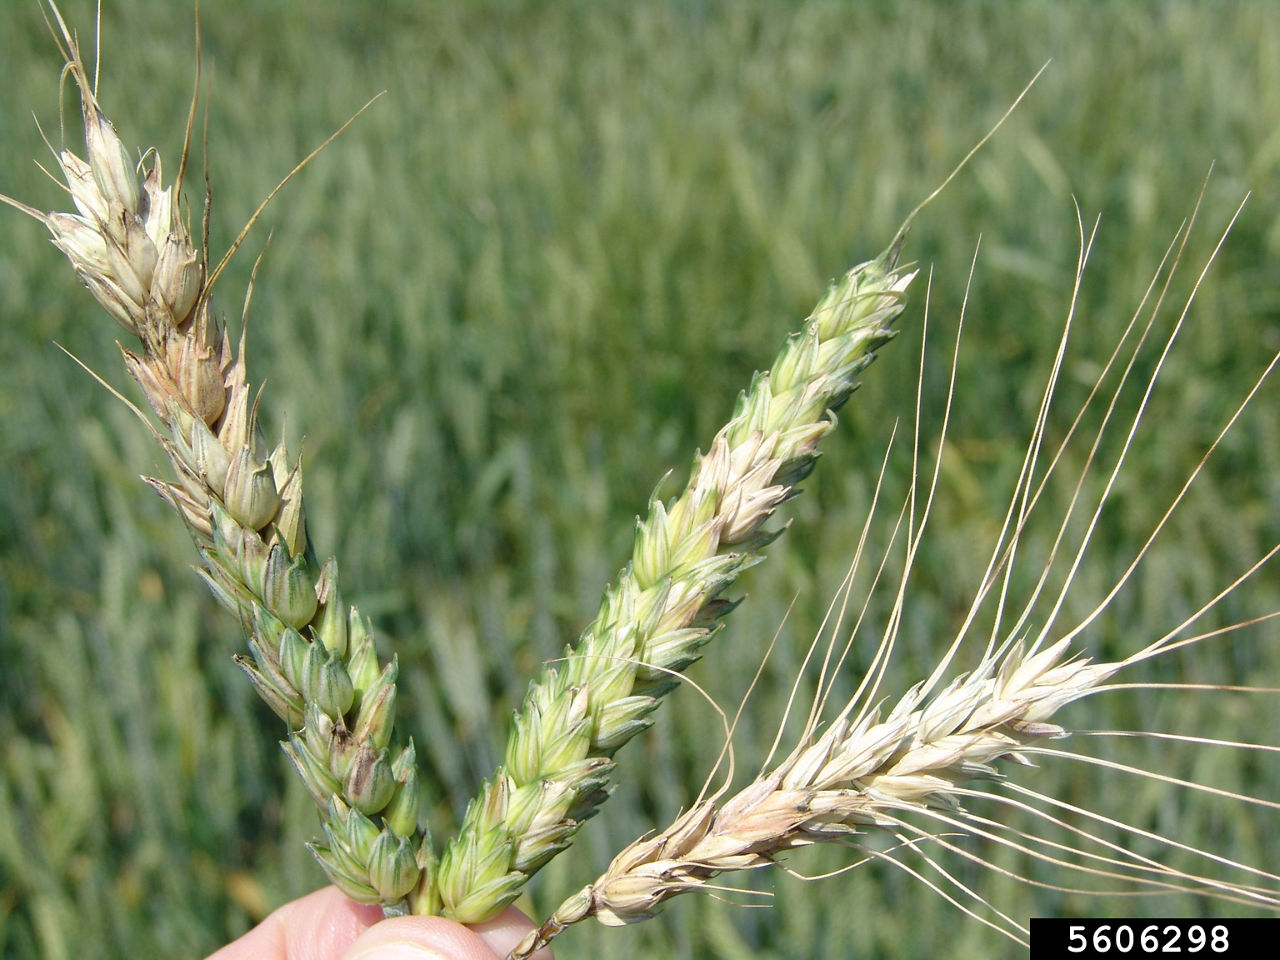 Figure 1. Wheat heads showing various degrees of FHB bleaching. G. J. Holmes, Strawberry Center, Cal Poly San Luis Obispo, Bugwood.org. 